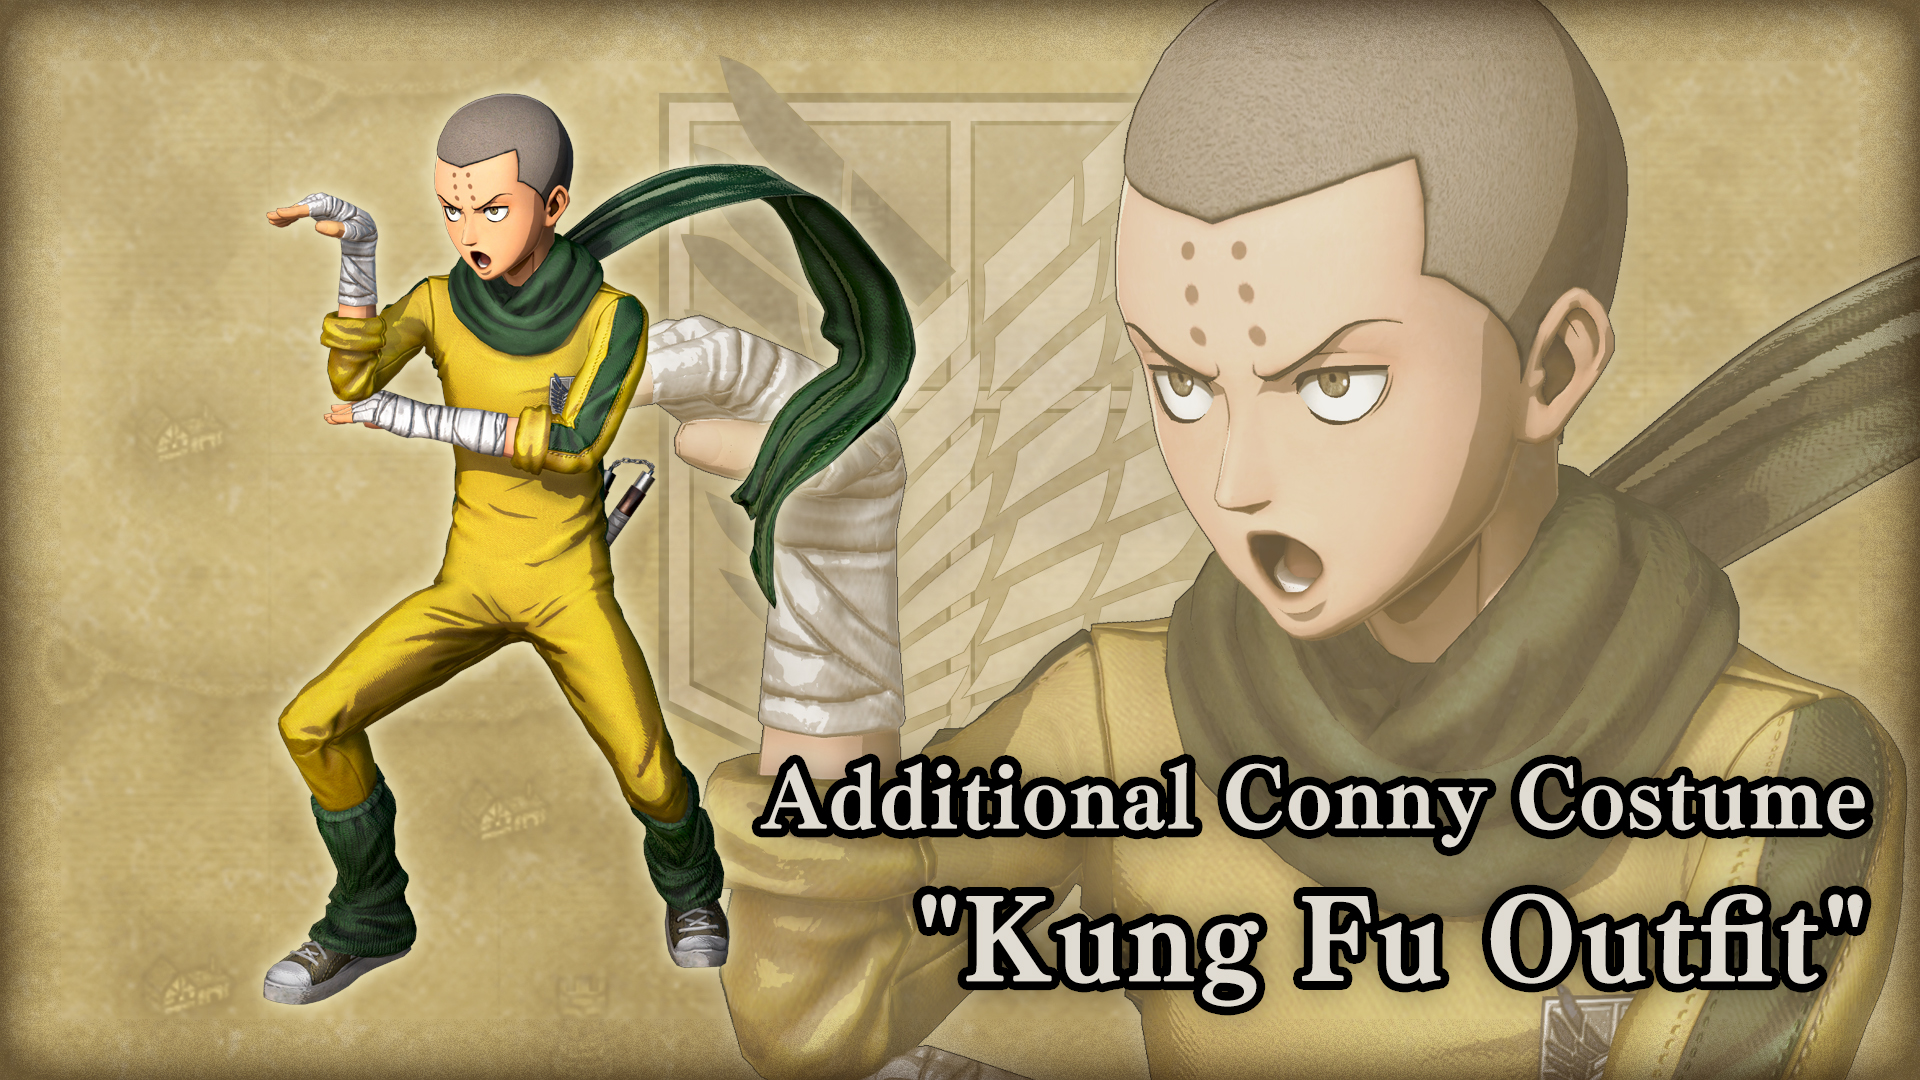 Additional Conny Costume: "Kung Fu Outfit"